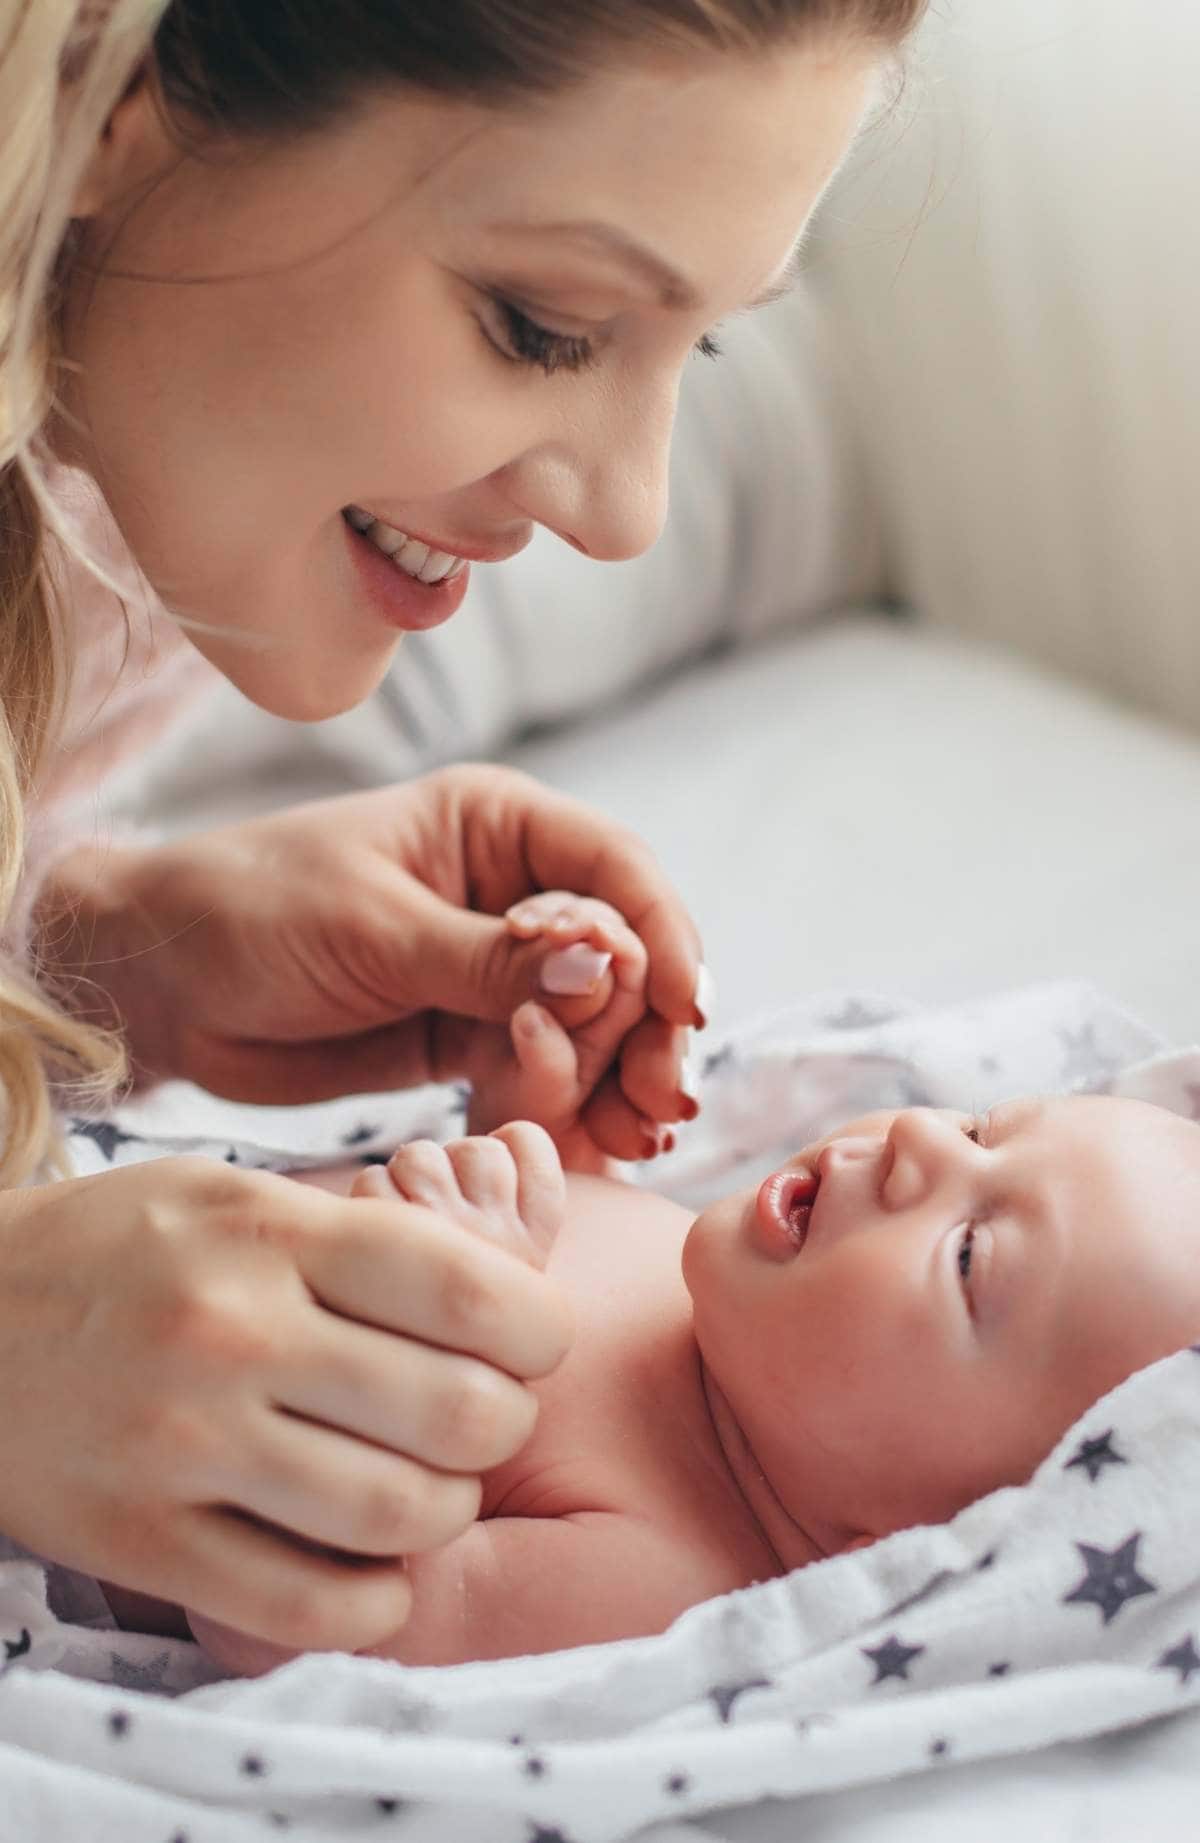 From the moment of getting a positive pregnancy test, new moms can feel overwhelmed. To help the new mothers in our life, we should be asking questions that are supportive and help build a new mom up. Here are 7 questions you should be asking a new mom.